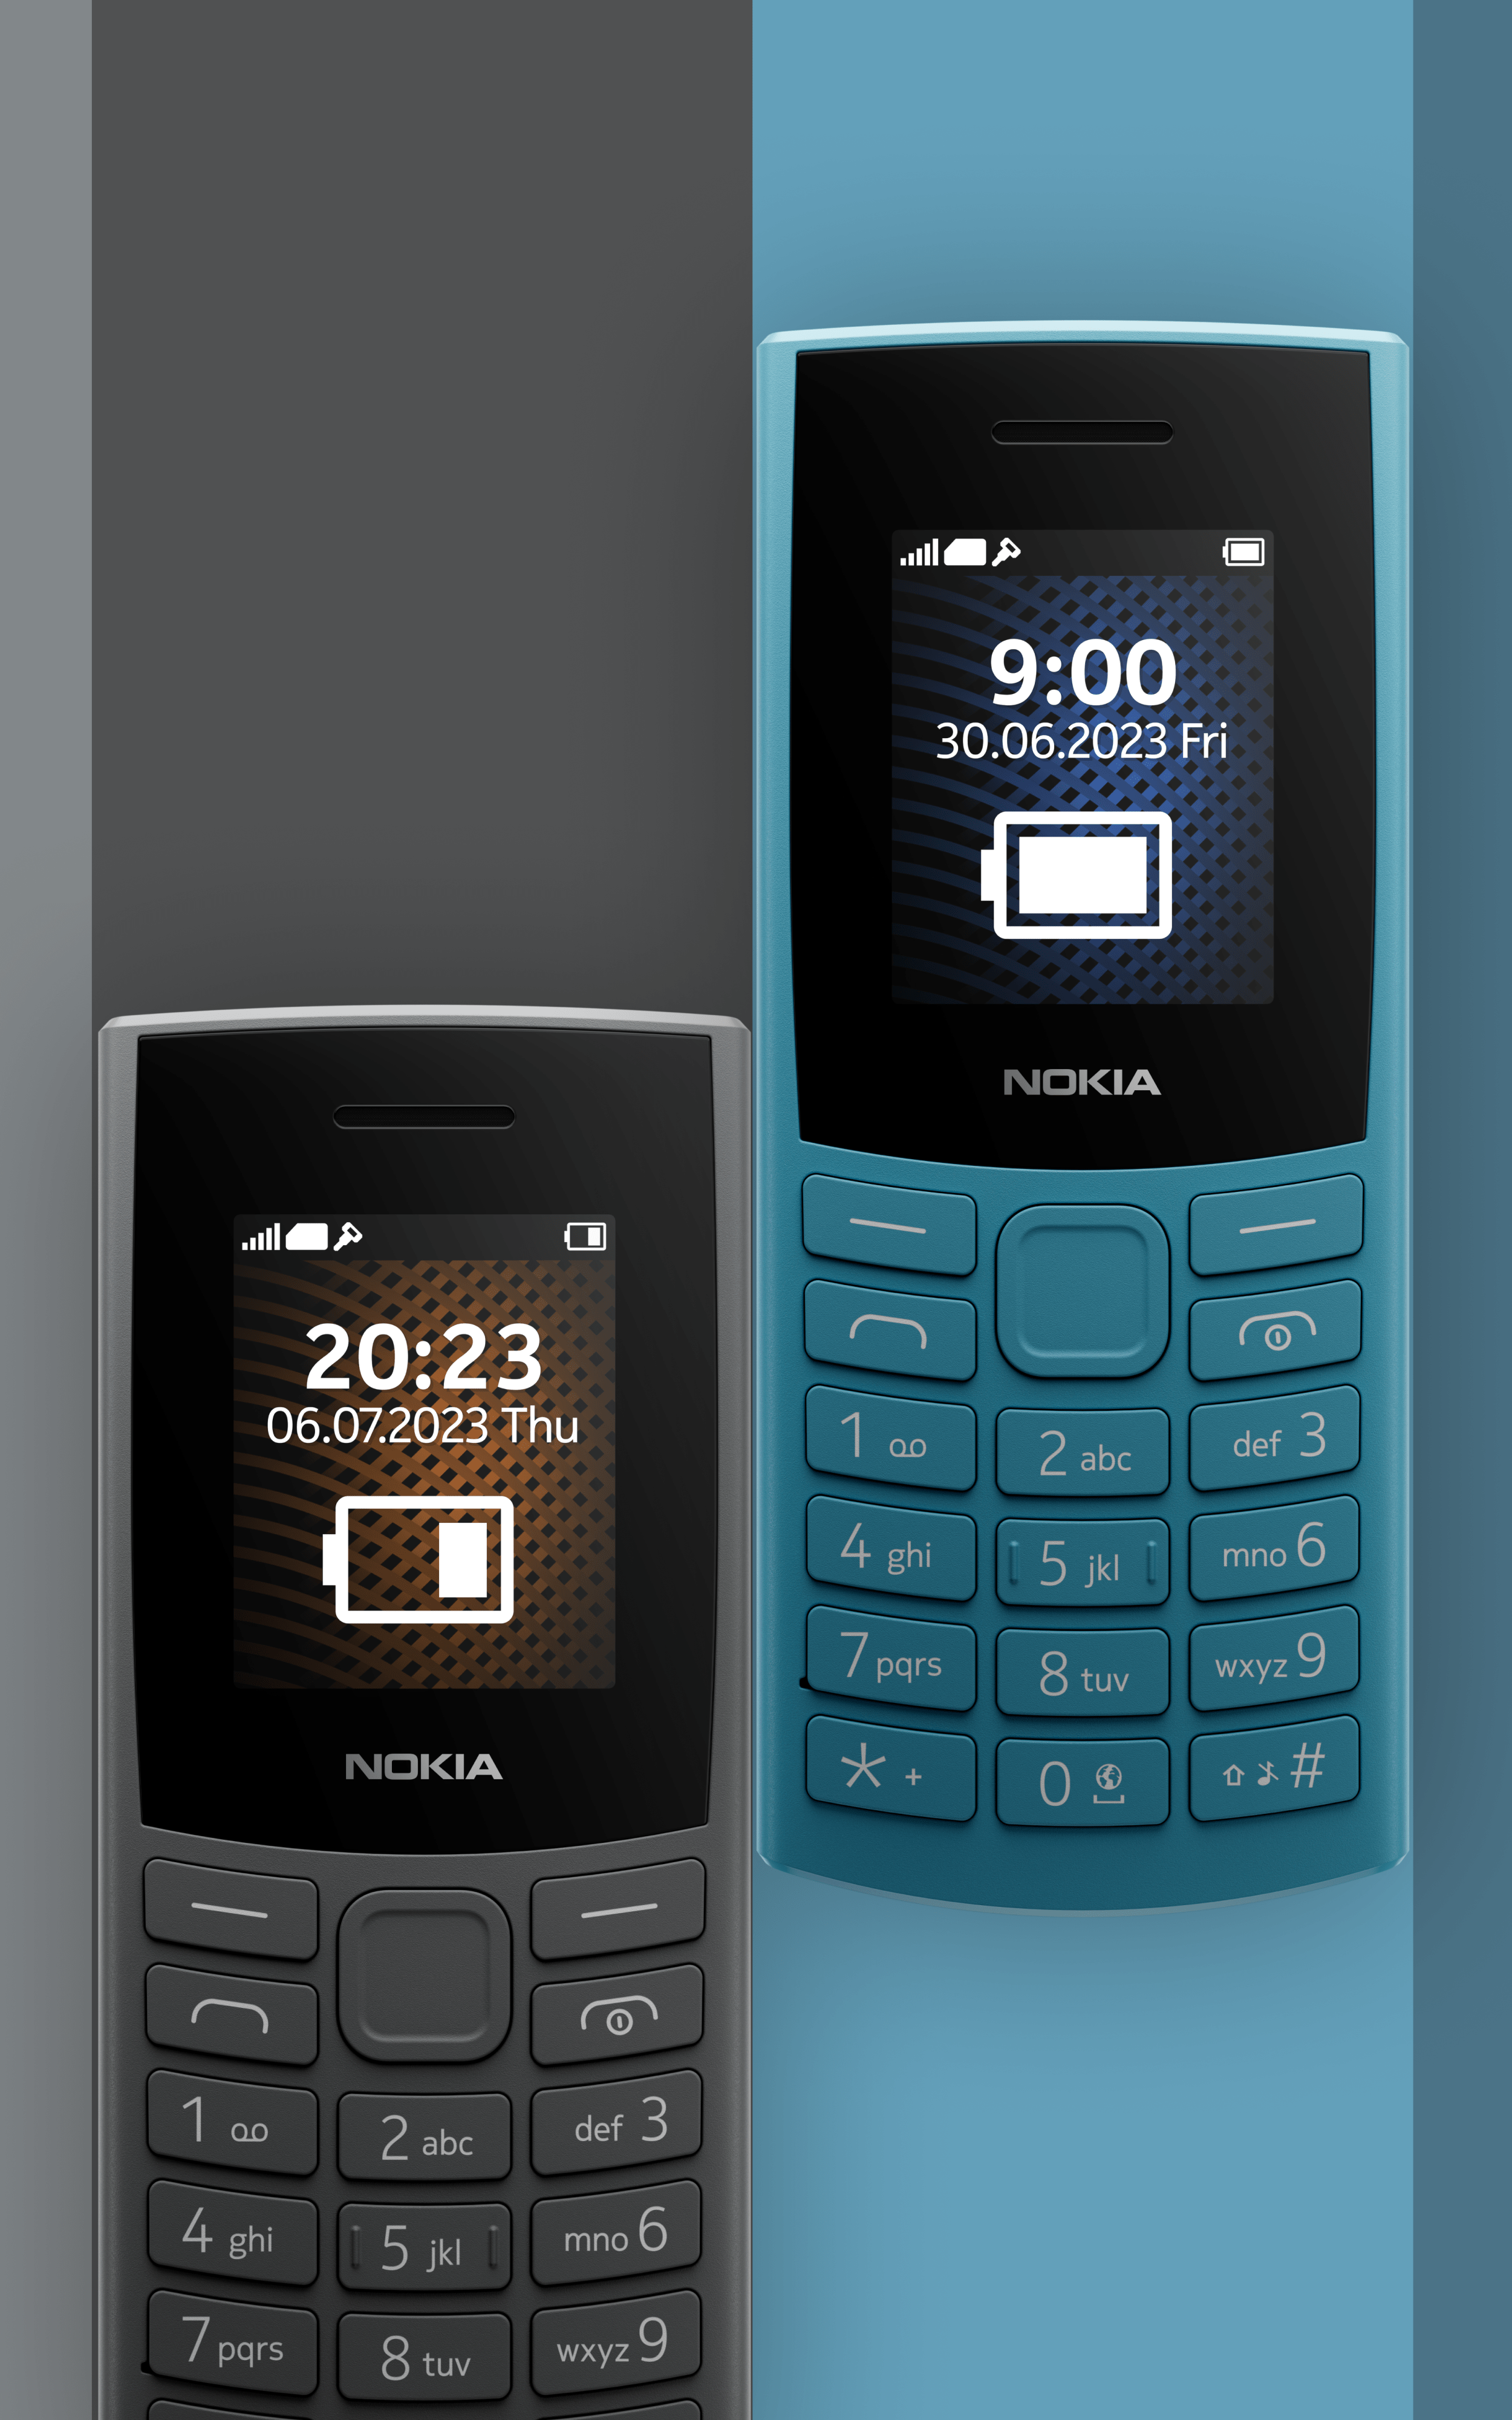 Nokia 105 feature phone internet with 4G